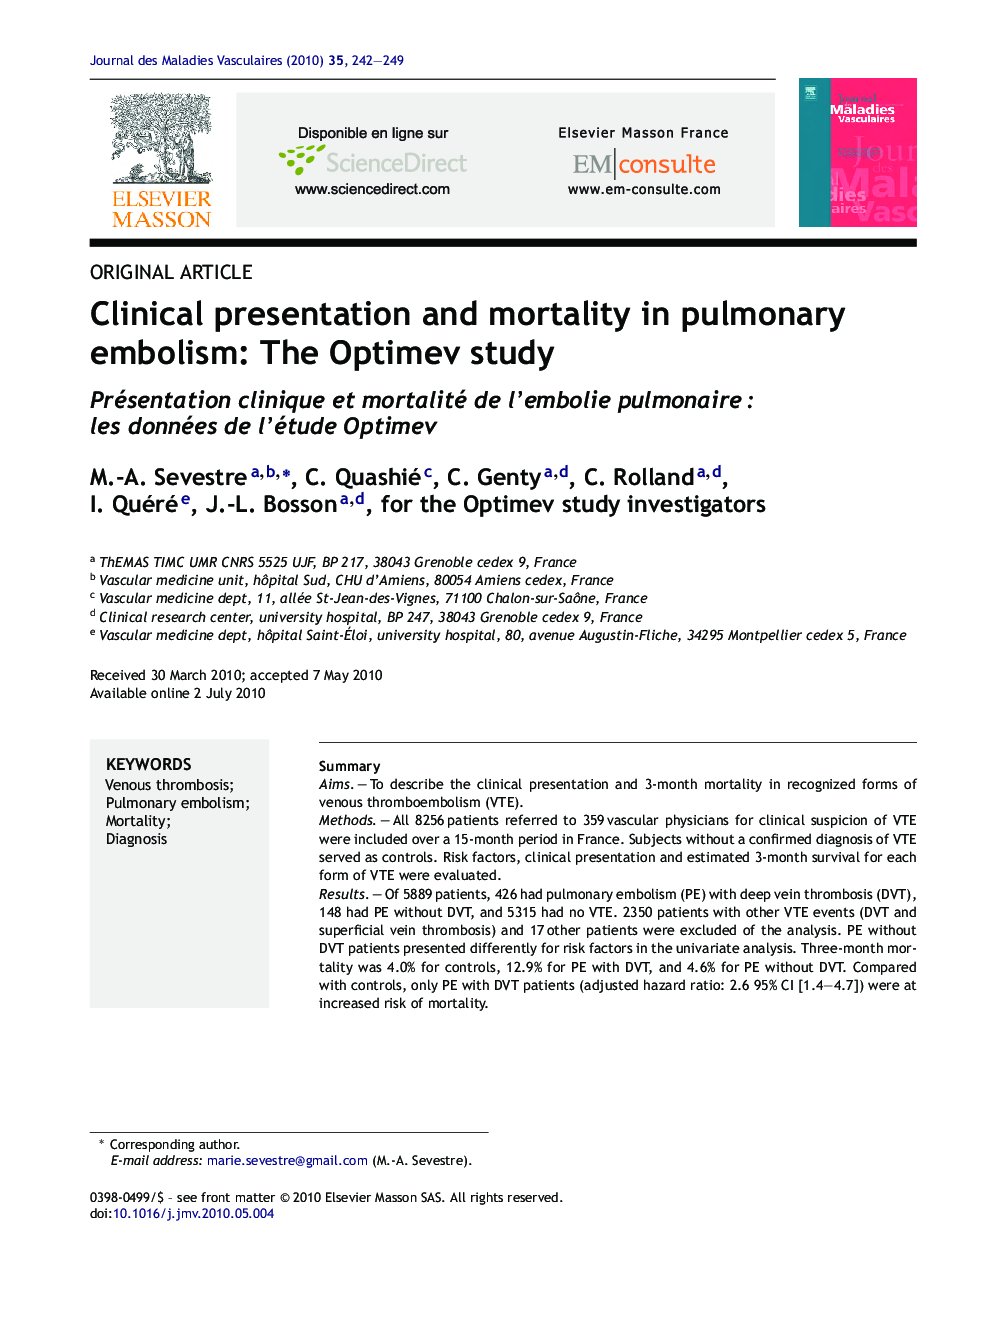 Clinical presentation and mortality in pulmonary embolism: The Optimev study